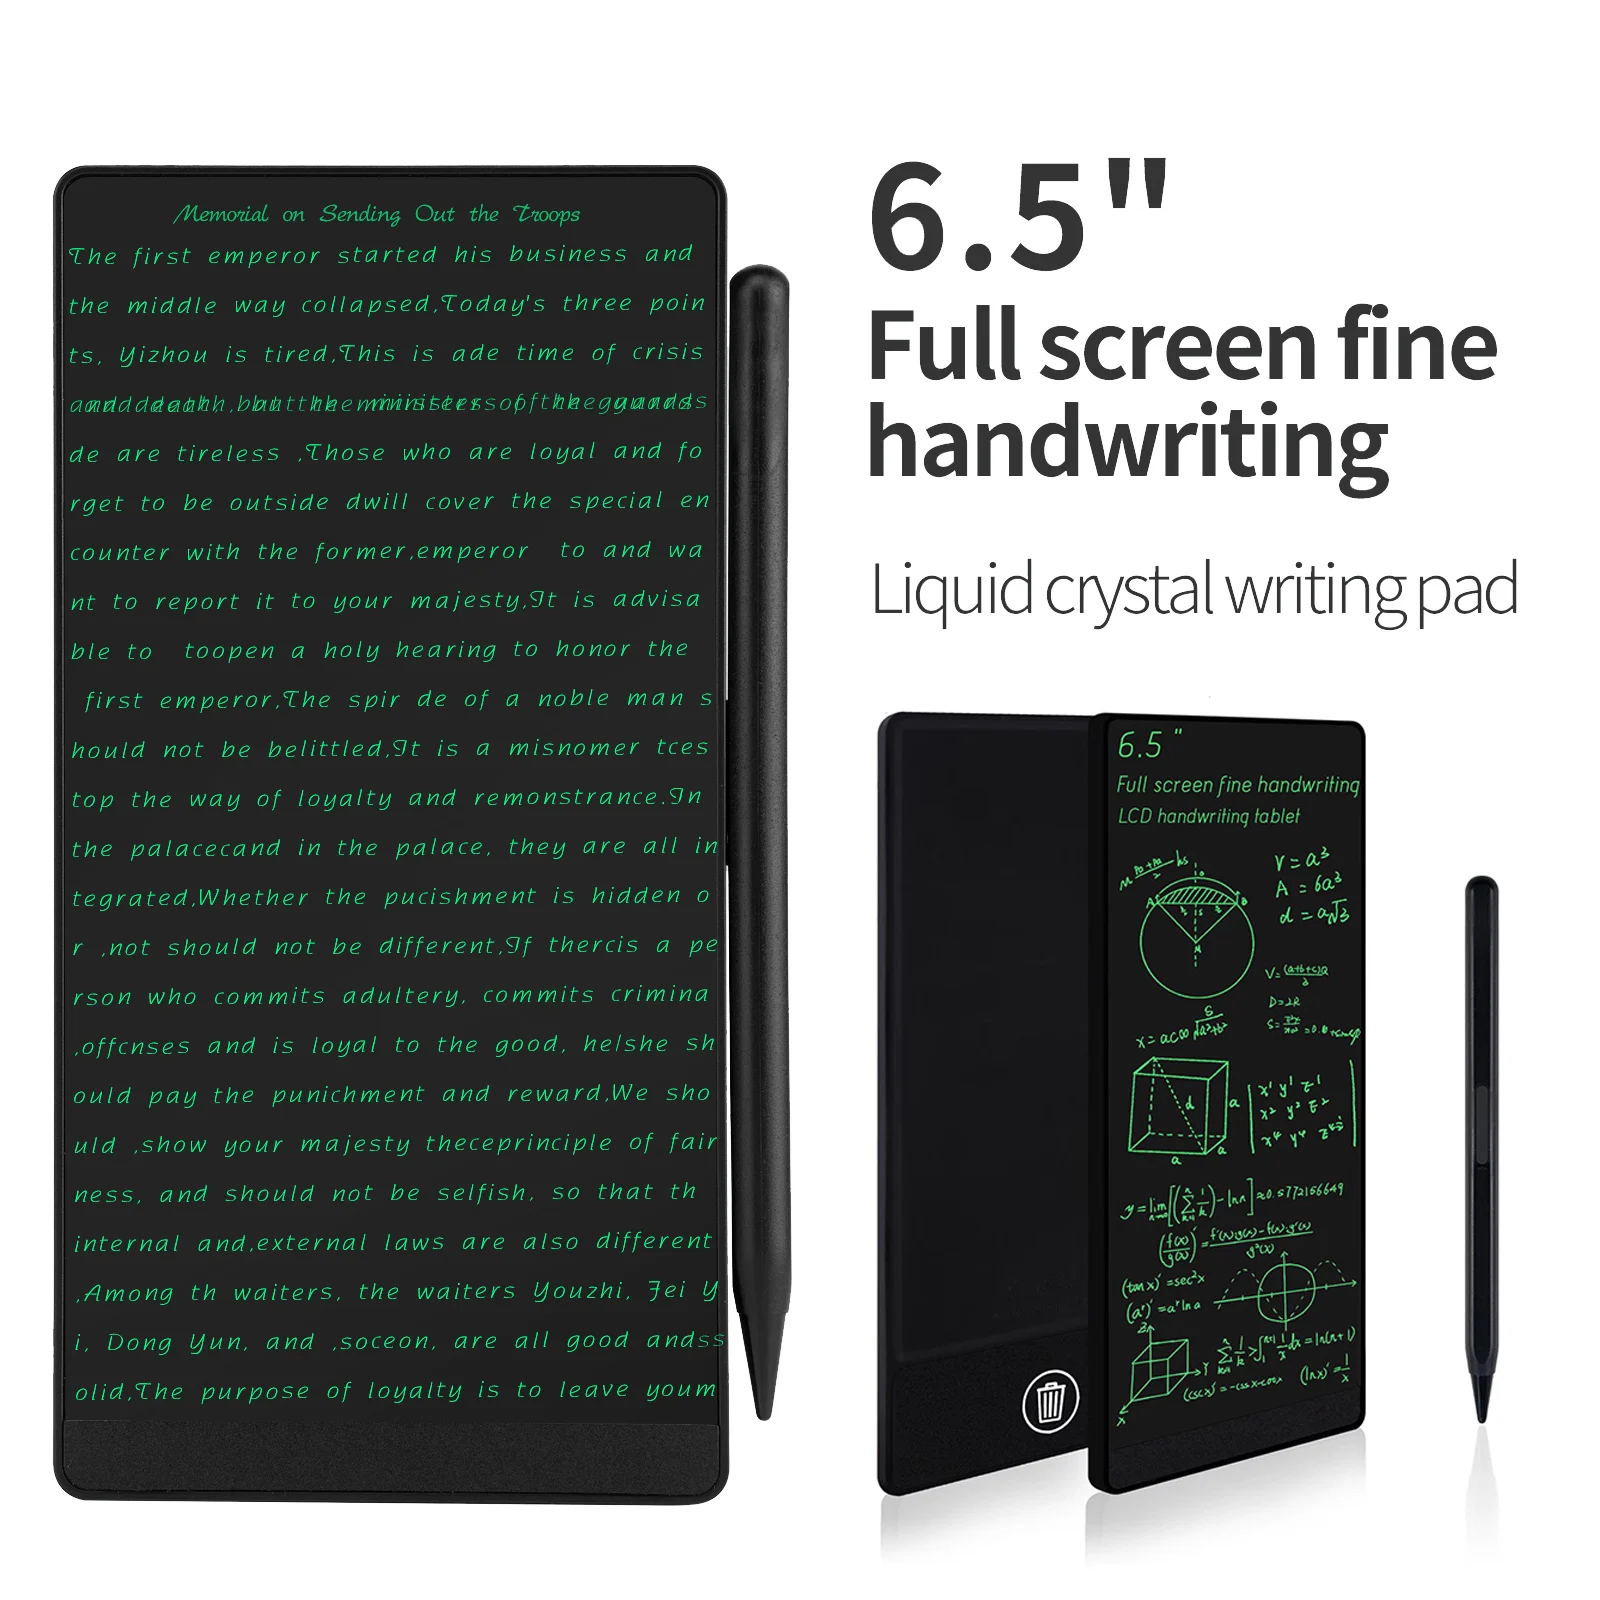 6.5-inch Full Screen Superfine Handwriting LCD Writing Tablet Meeting Content Magnetic Sketch Pad Liquid Crystal Drawings Board